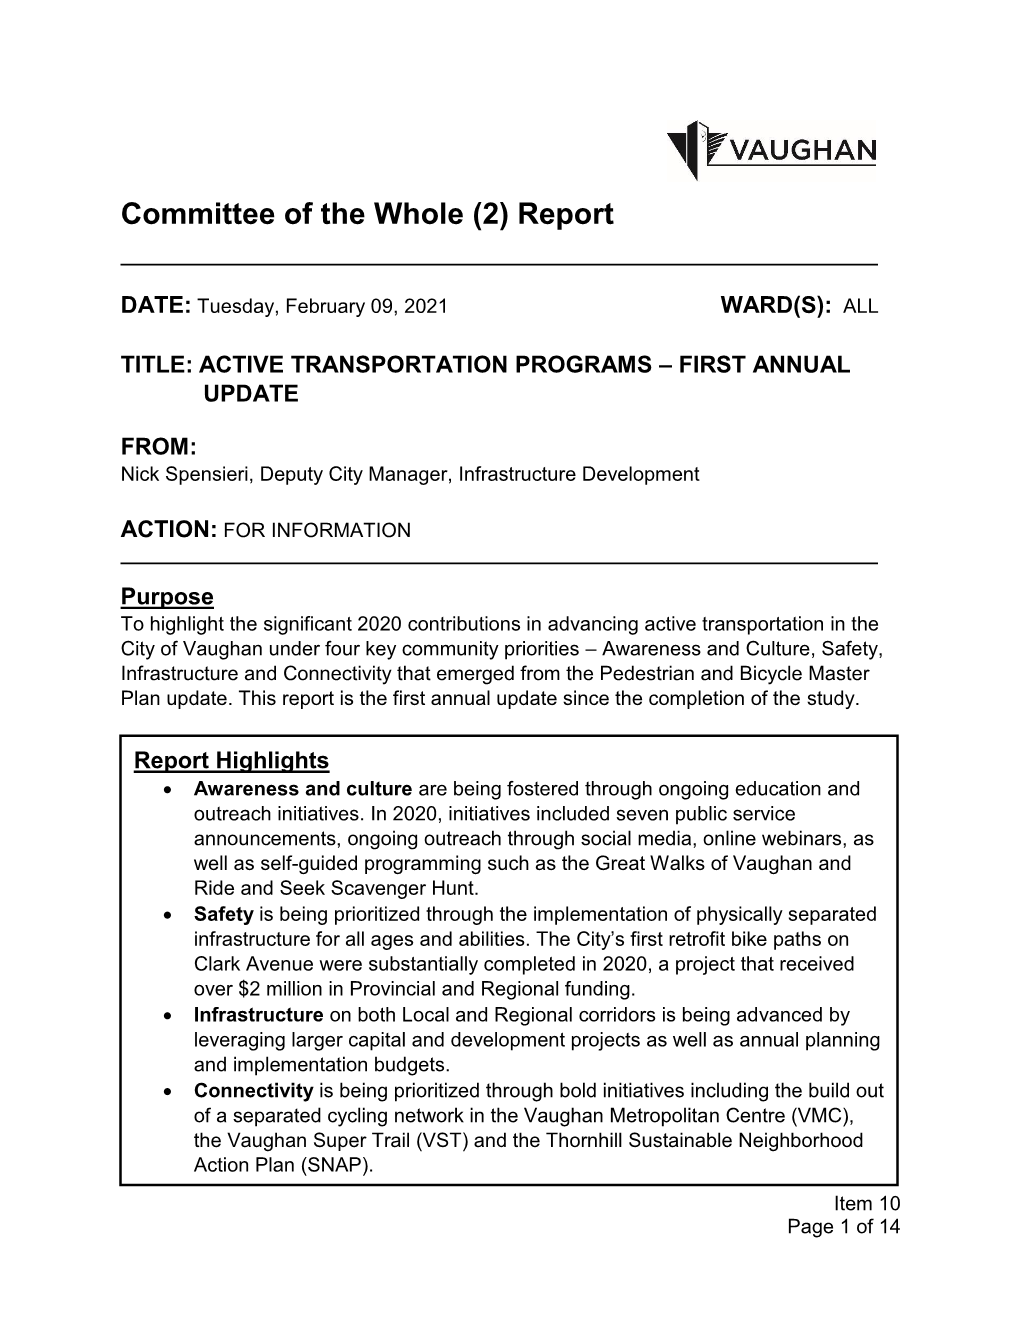 Active Transportation Programs – First Annual Update